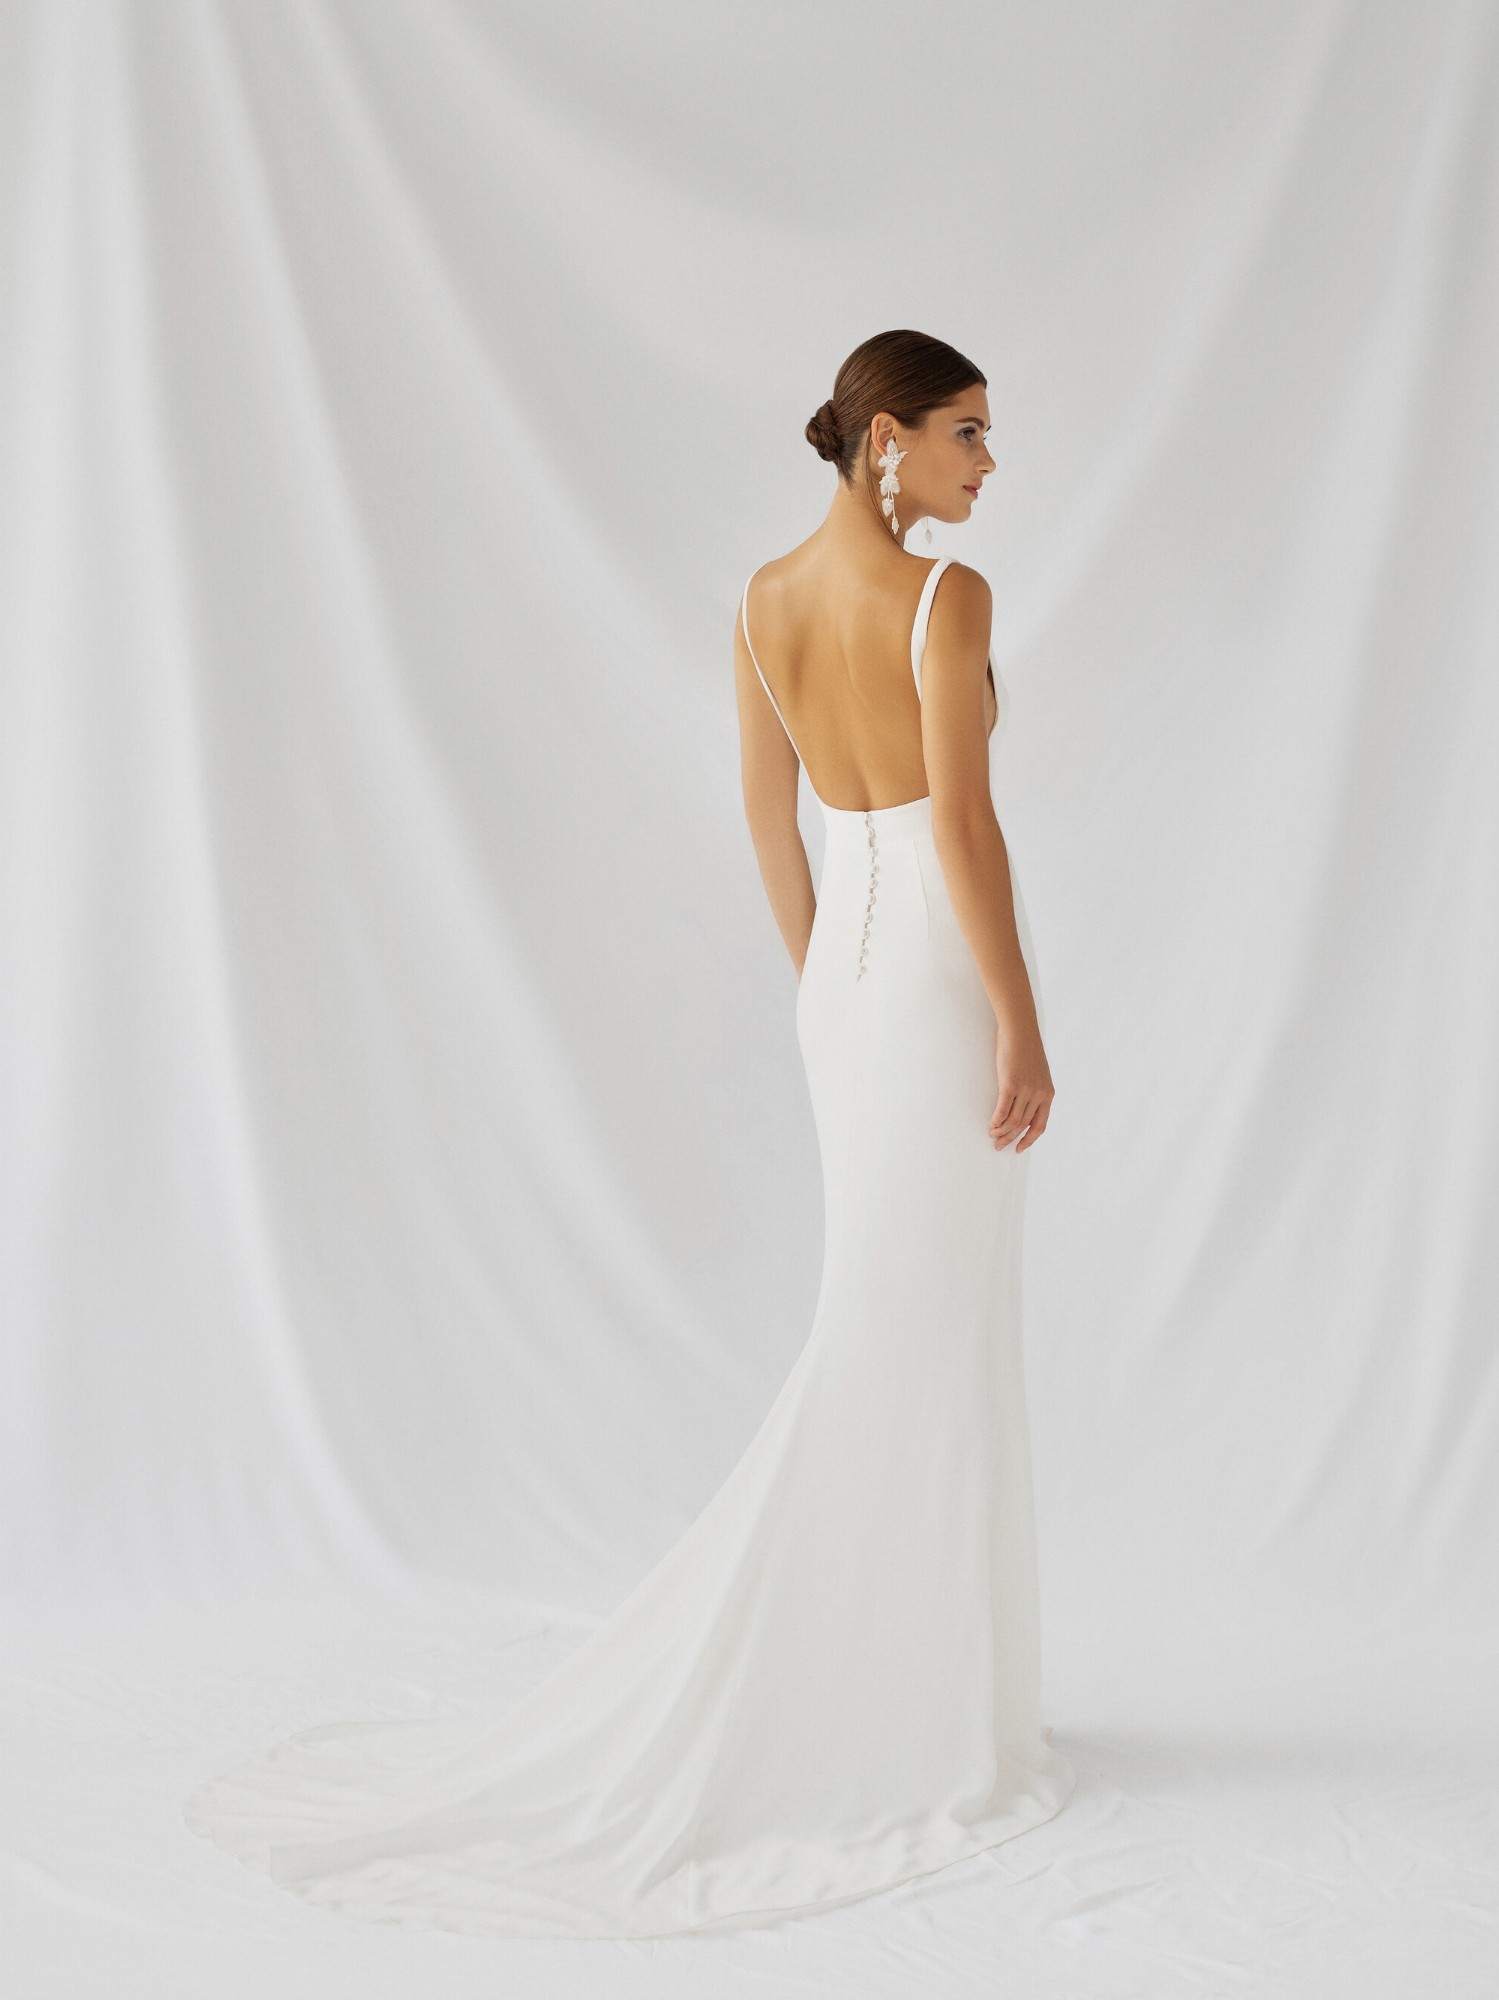 Viola Gown Inspirated By Botanica of Alexandra Grecco 2021 Bridal Collection